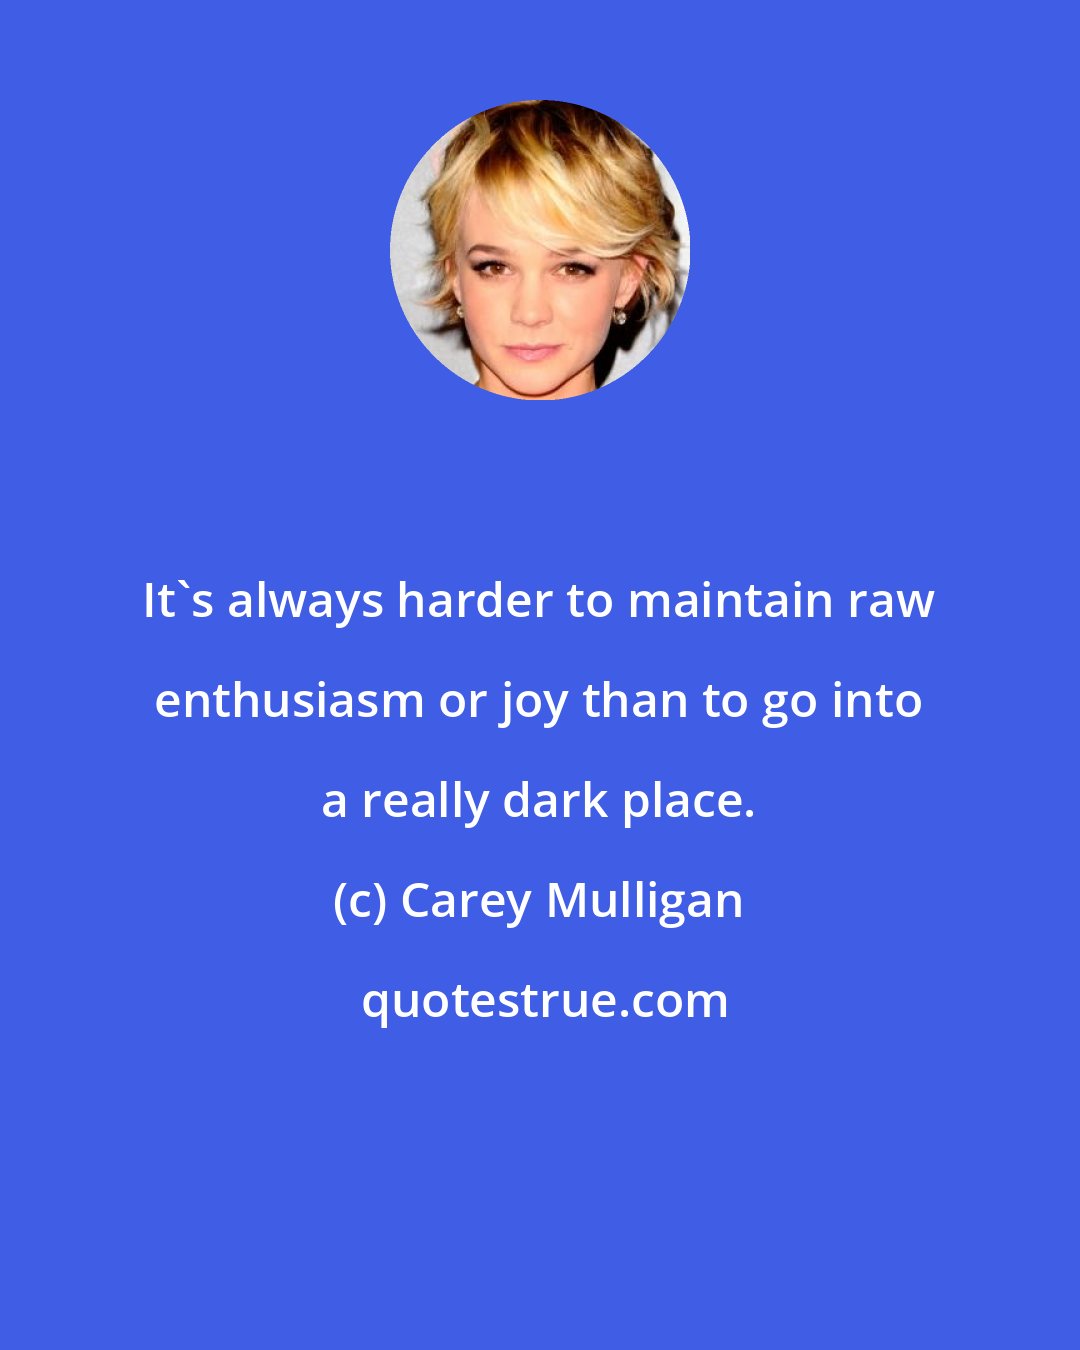 Carey Mulligan: It's always harder to maintain raw enthusiasm or joy than to go into a really dark place.